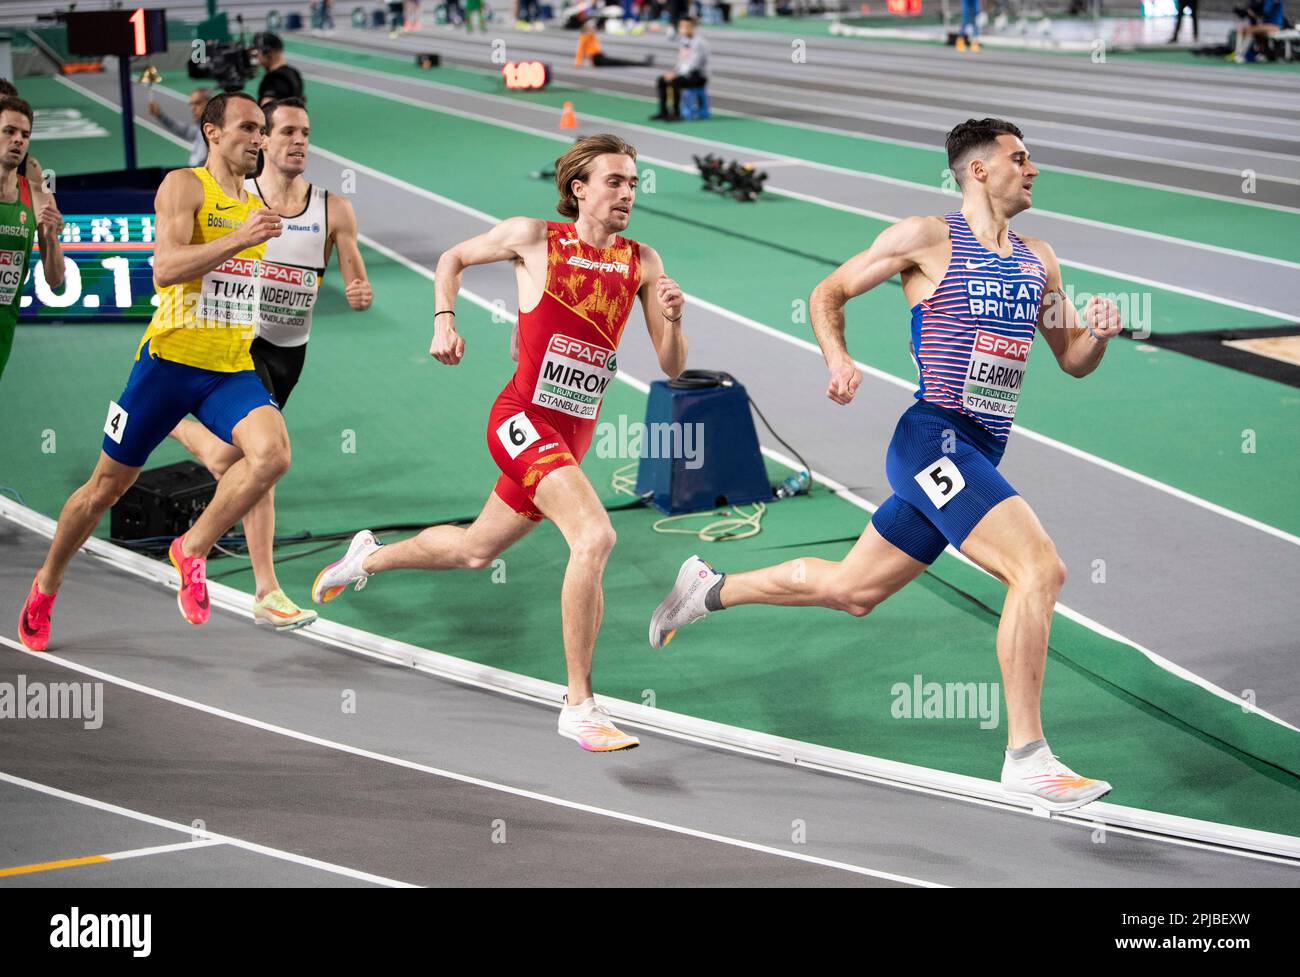 Javier Miron of Spain and Guy Learmonth of Great Britain & NI competing in  the men's 800m heats at the European Indoor Athletics Championships at Atak  Stock Photo - Alamy